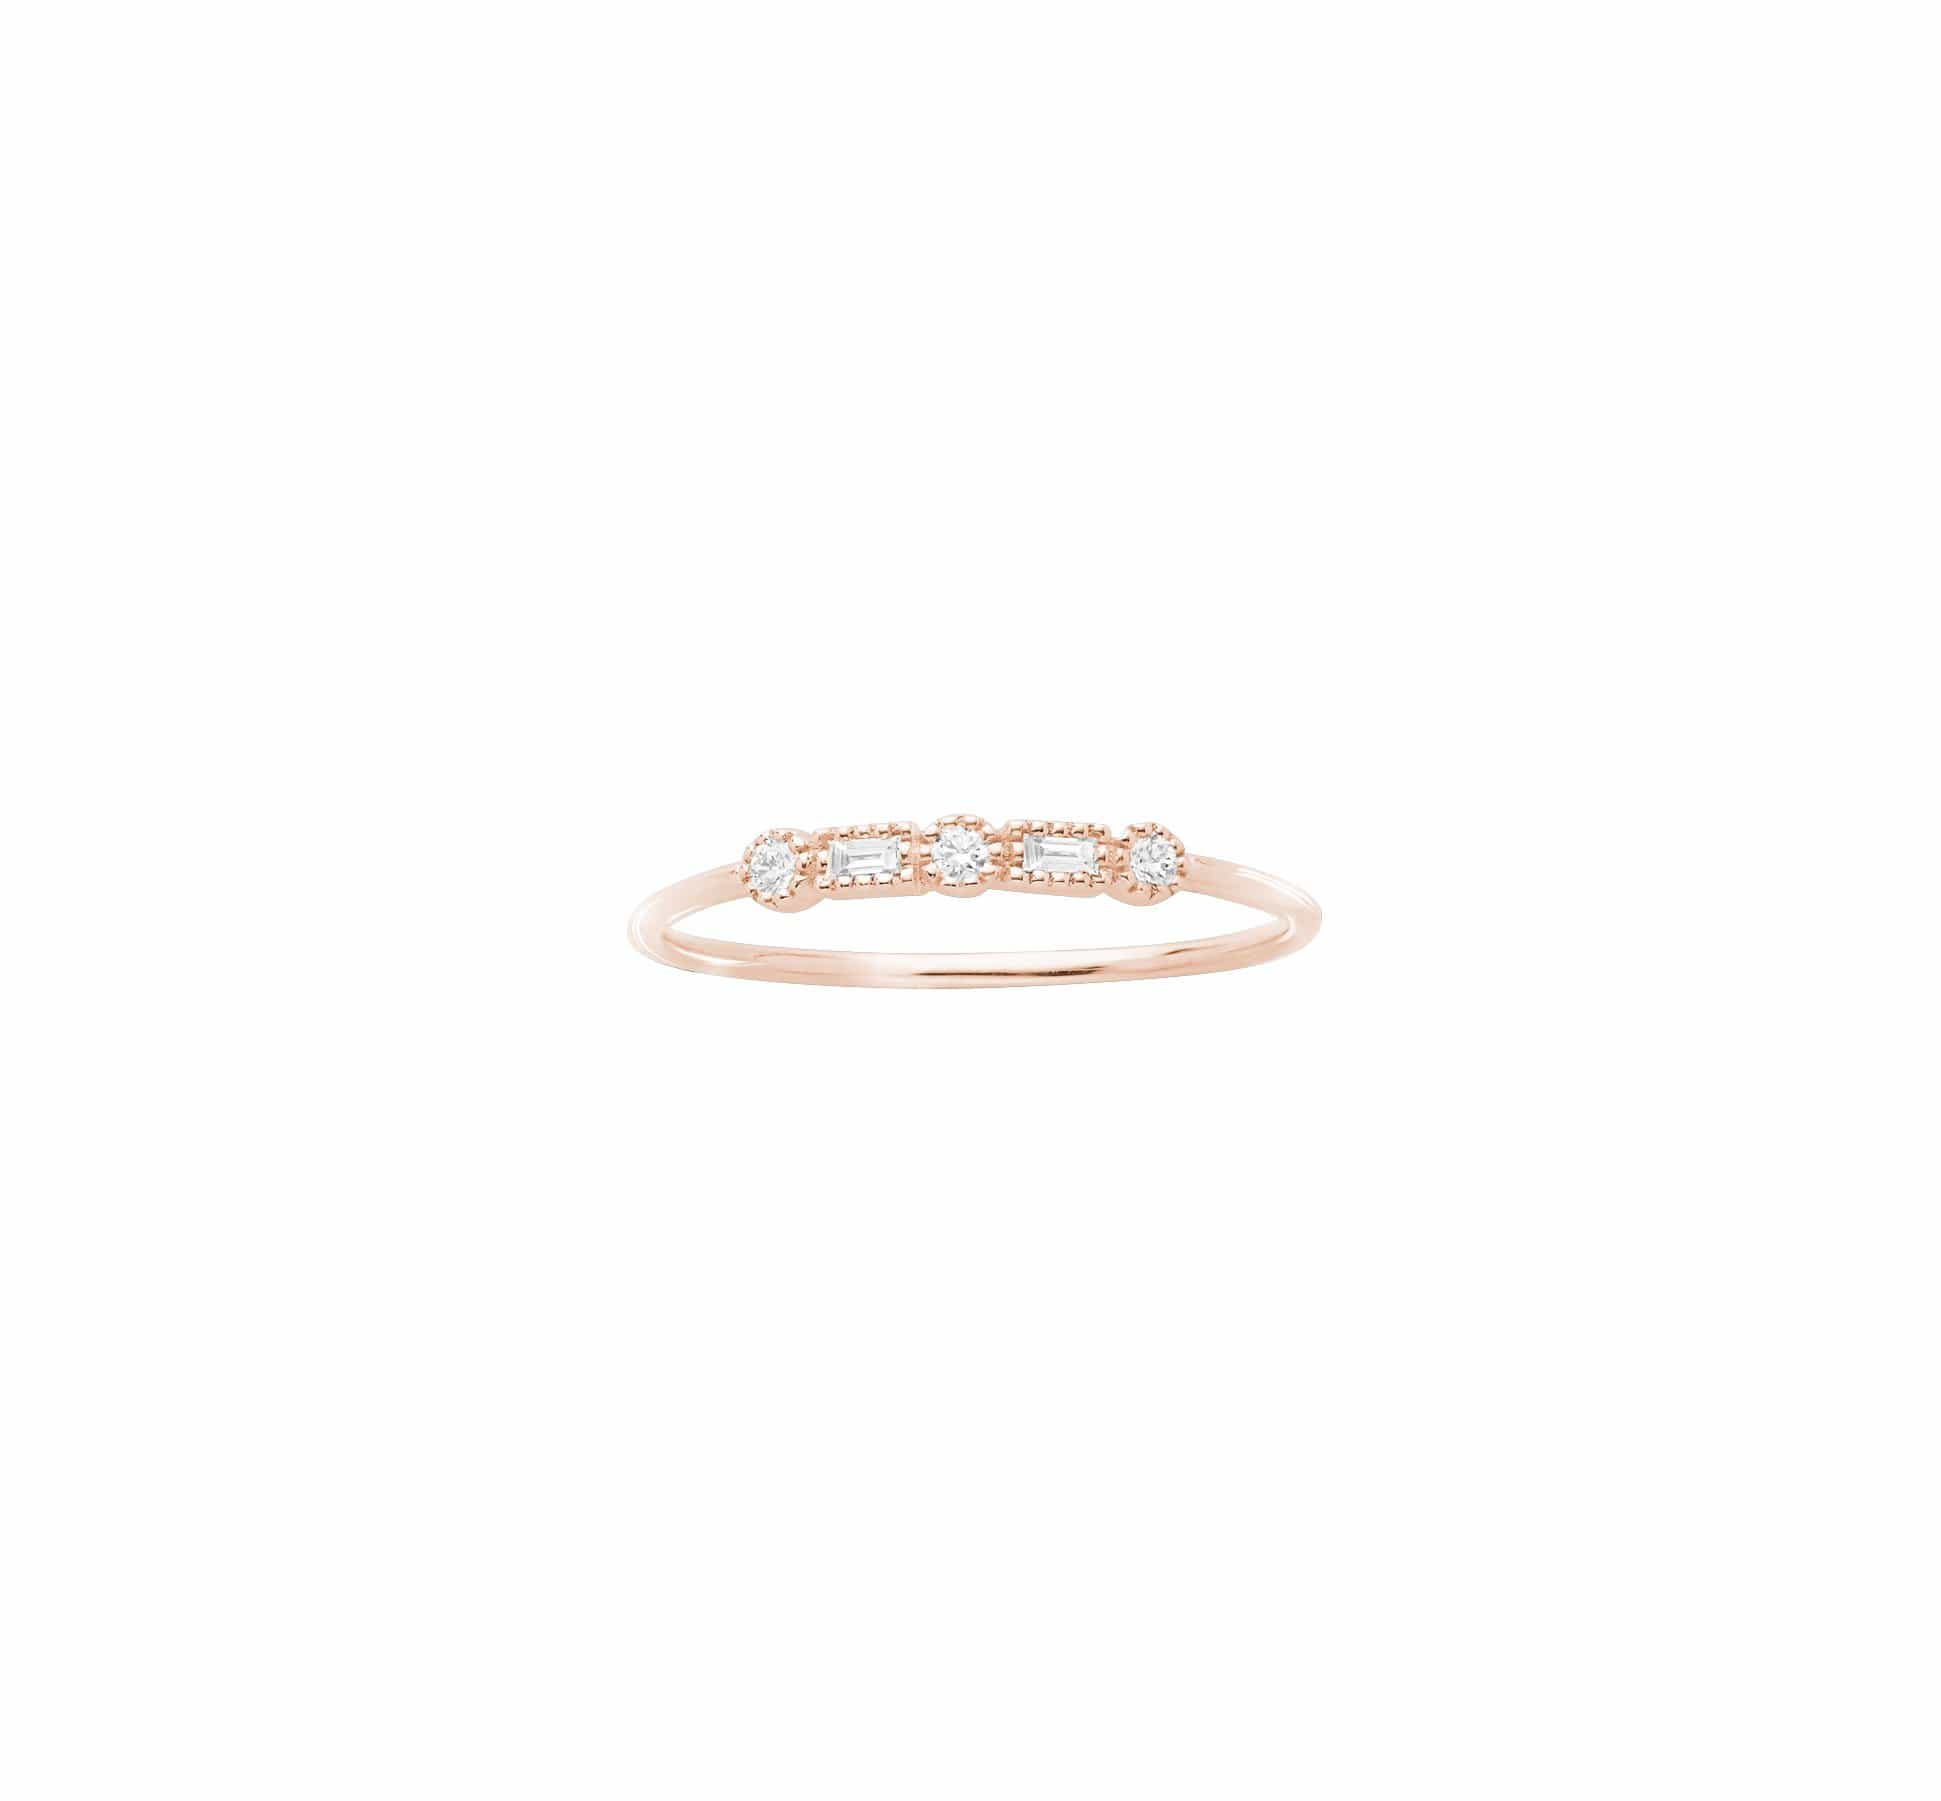 Serenity Small version gold and diamonds